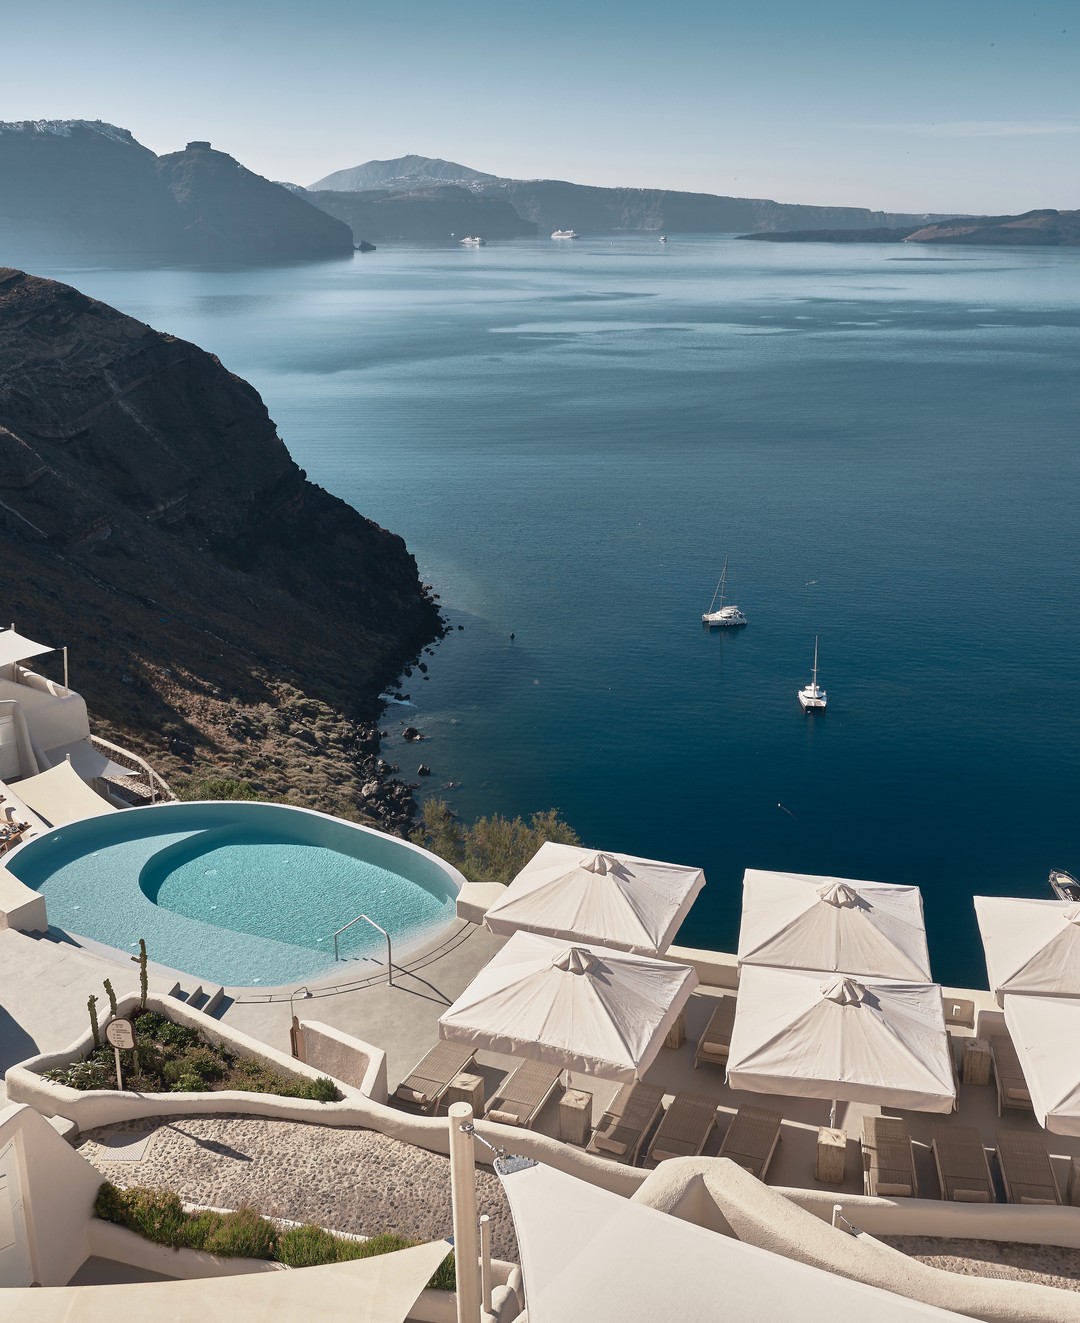 Immerse yourself in the grandiose surroundings at Mystique Santorini - Best Infinity Pools in Europe